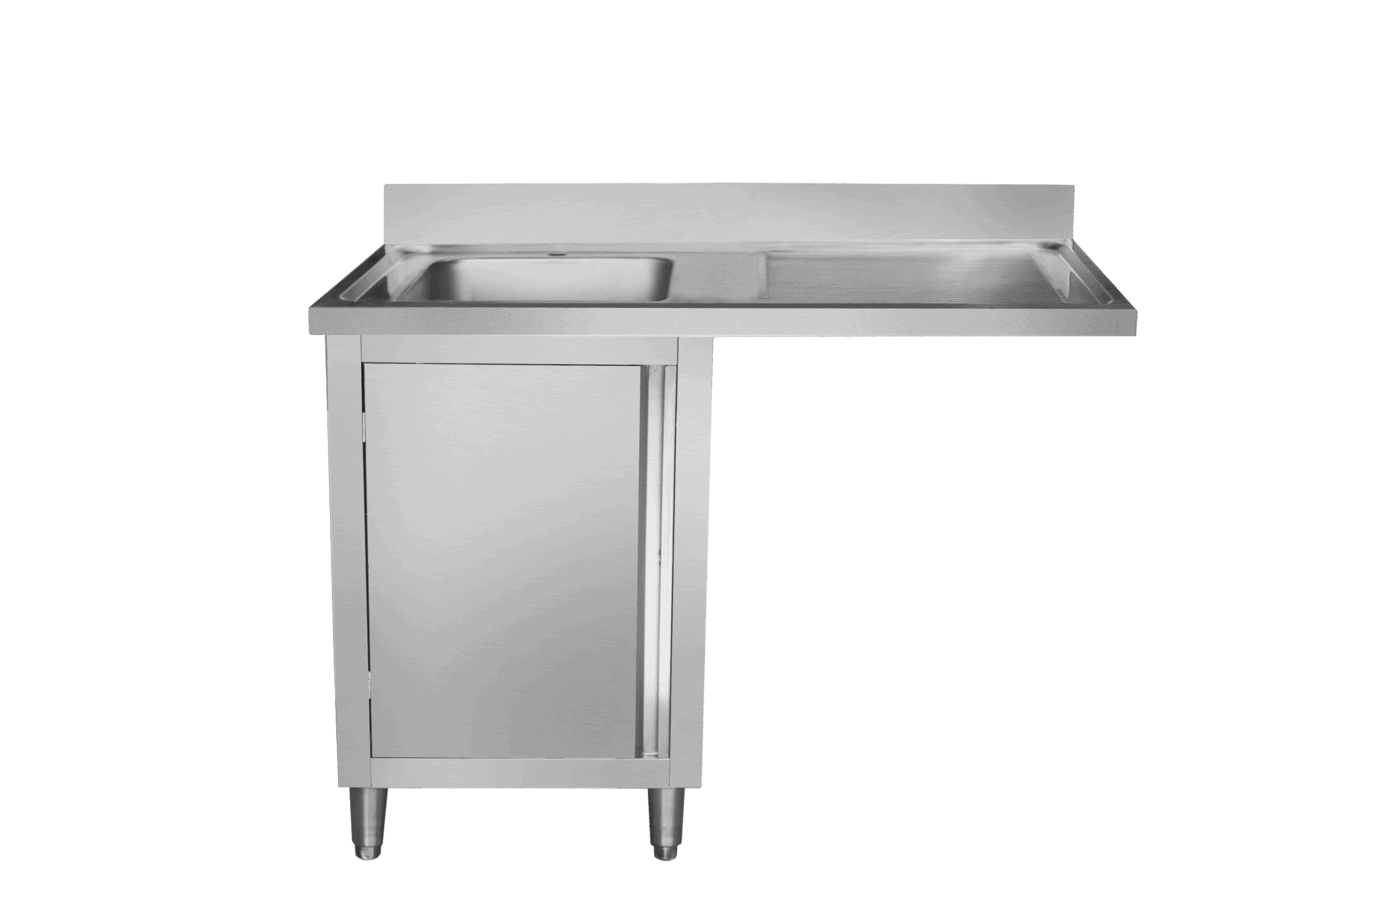 Stainless Steel Dishwasher Sink Cupboard - commercial catering sinks